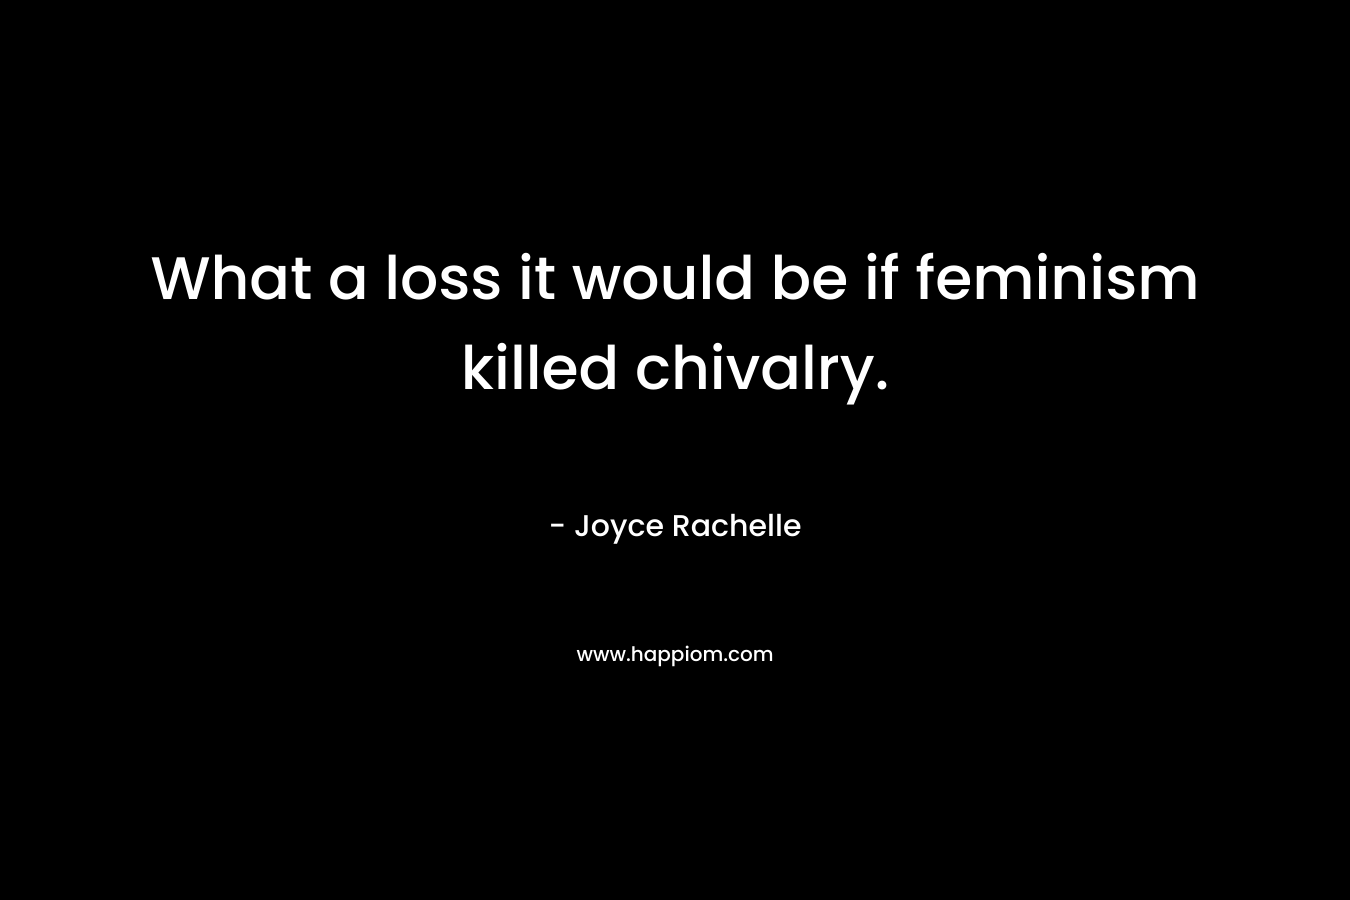 What a loss it would be if feminism killed chivalry.